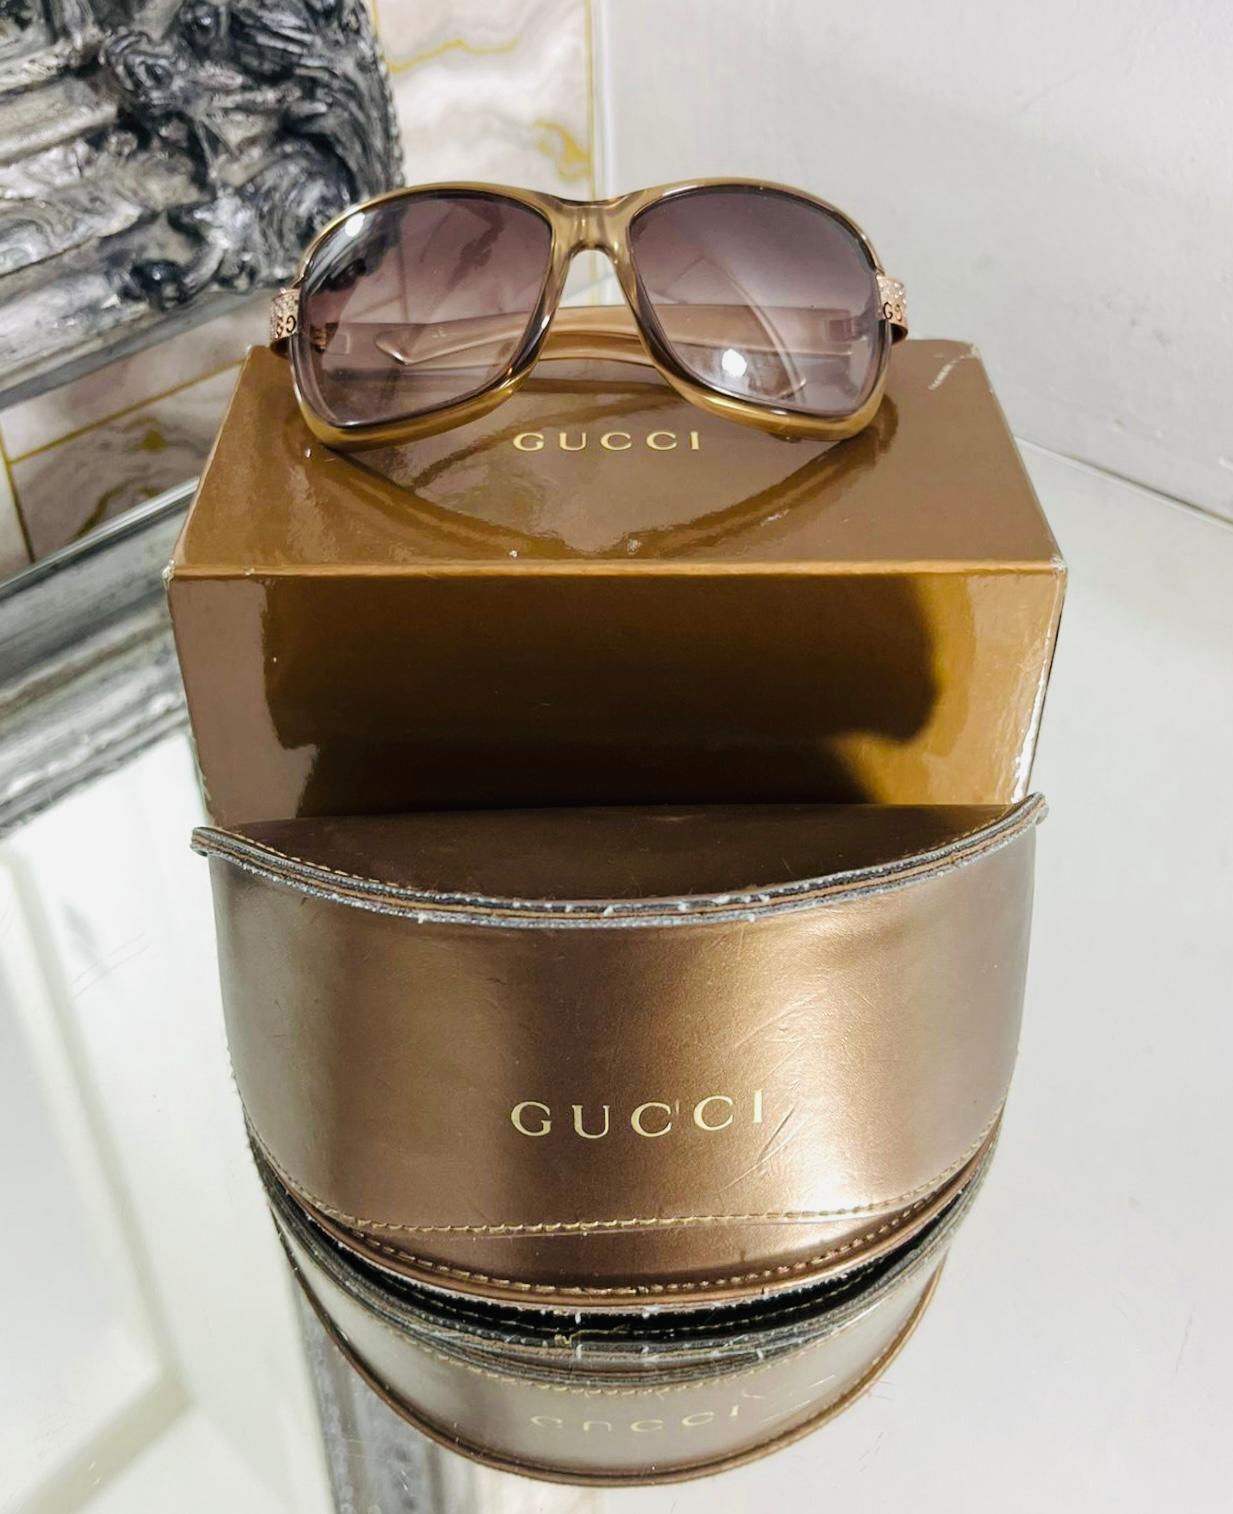 Gucci Crystal GG Sunglasses

Havana, dark beige/gold sunglasses designed with oversized rounded rims and gradient purple lenses.

Detailed with 'GG' logo and crystal embellishment to the hinges.

Size – One Size

Condition – Very Good

Composition –